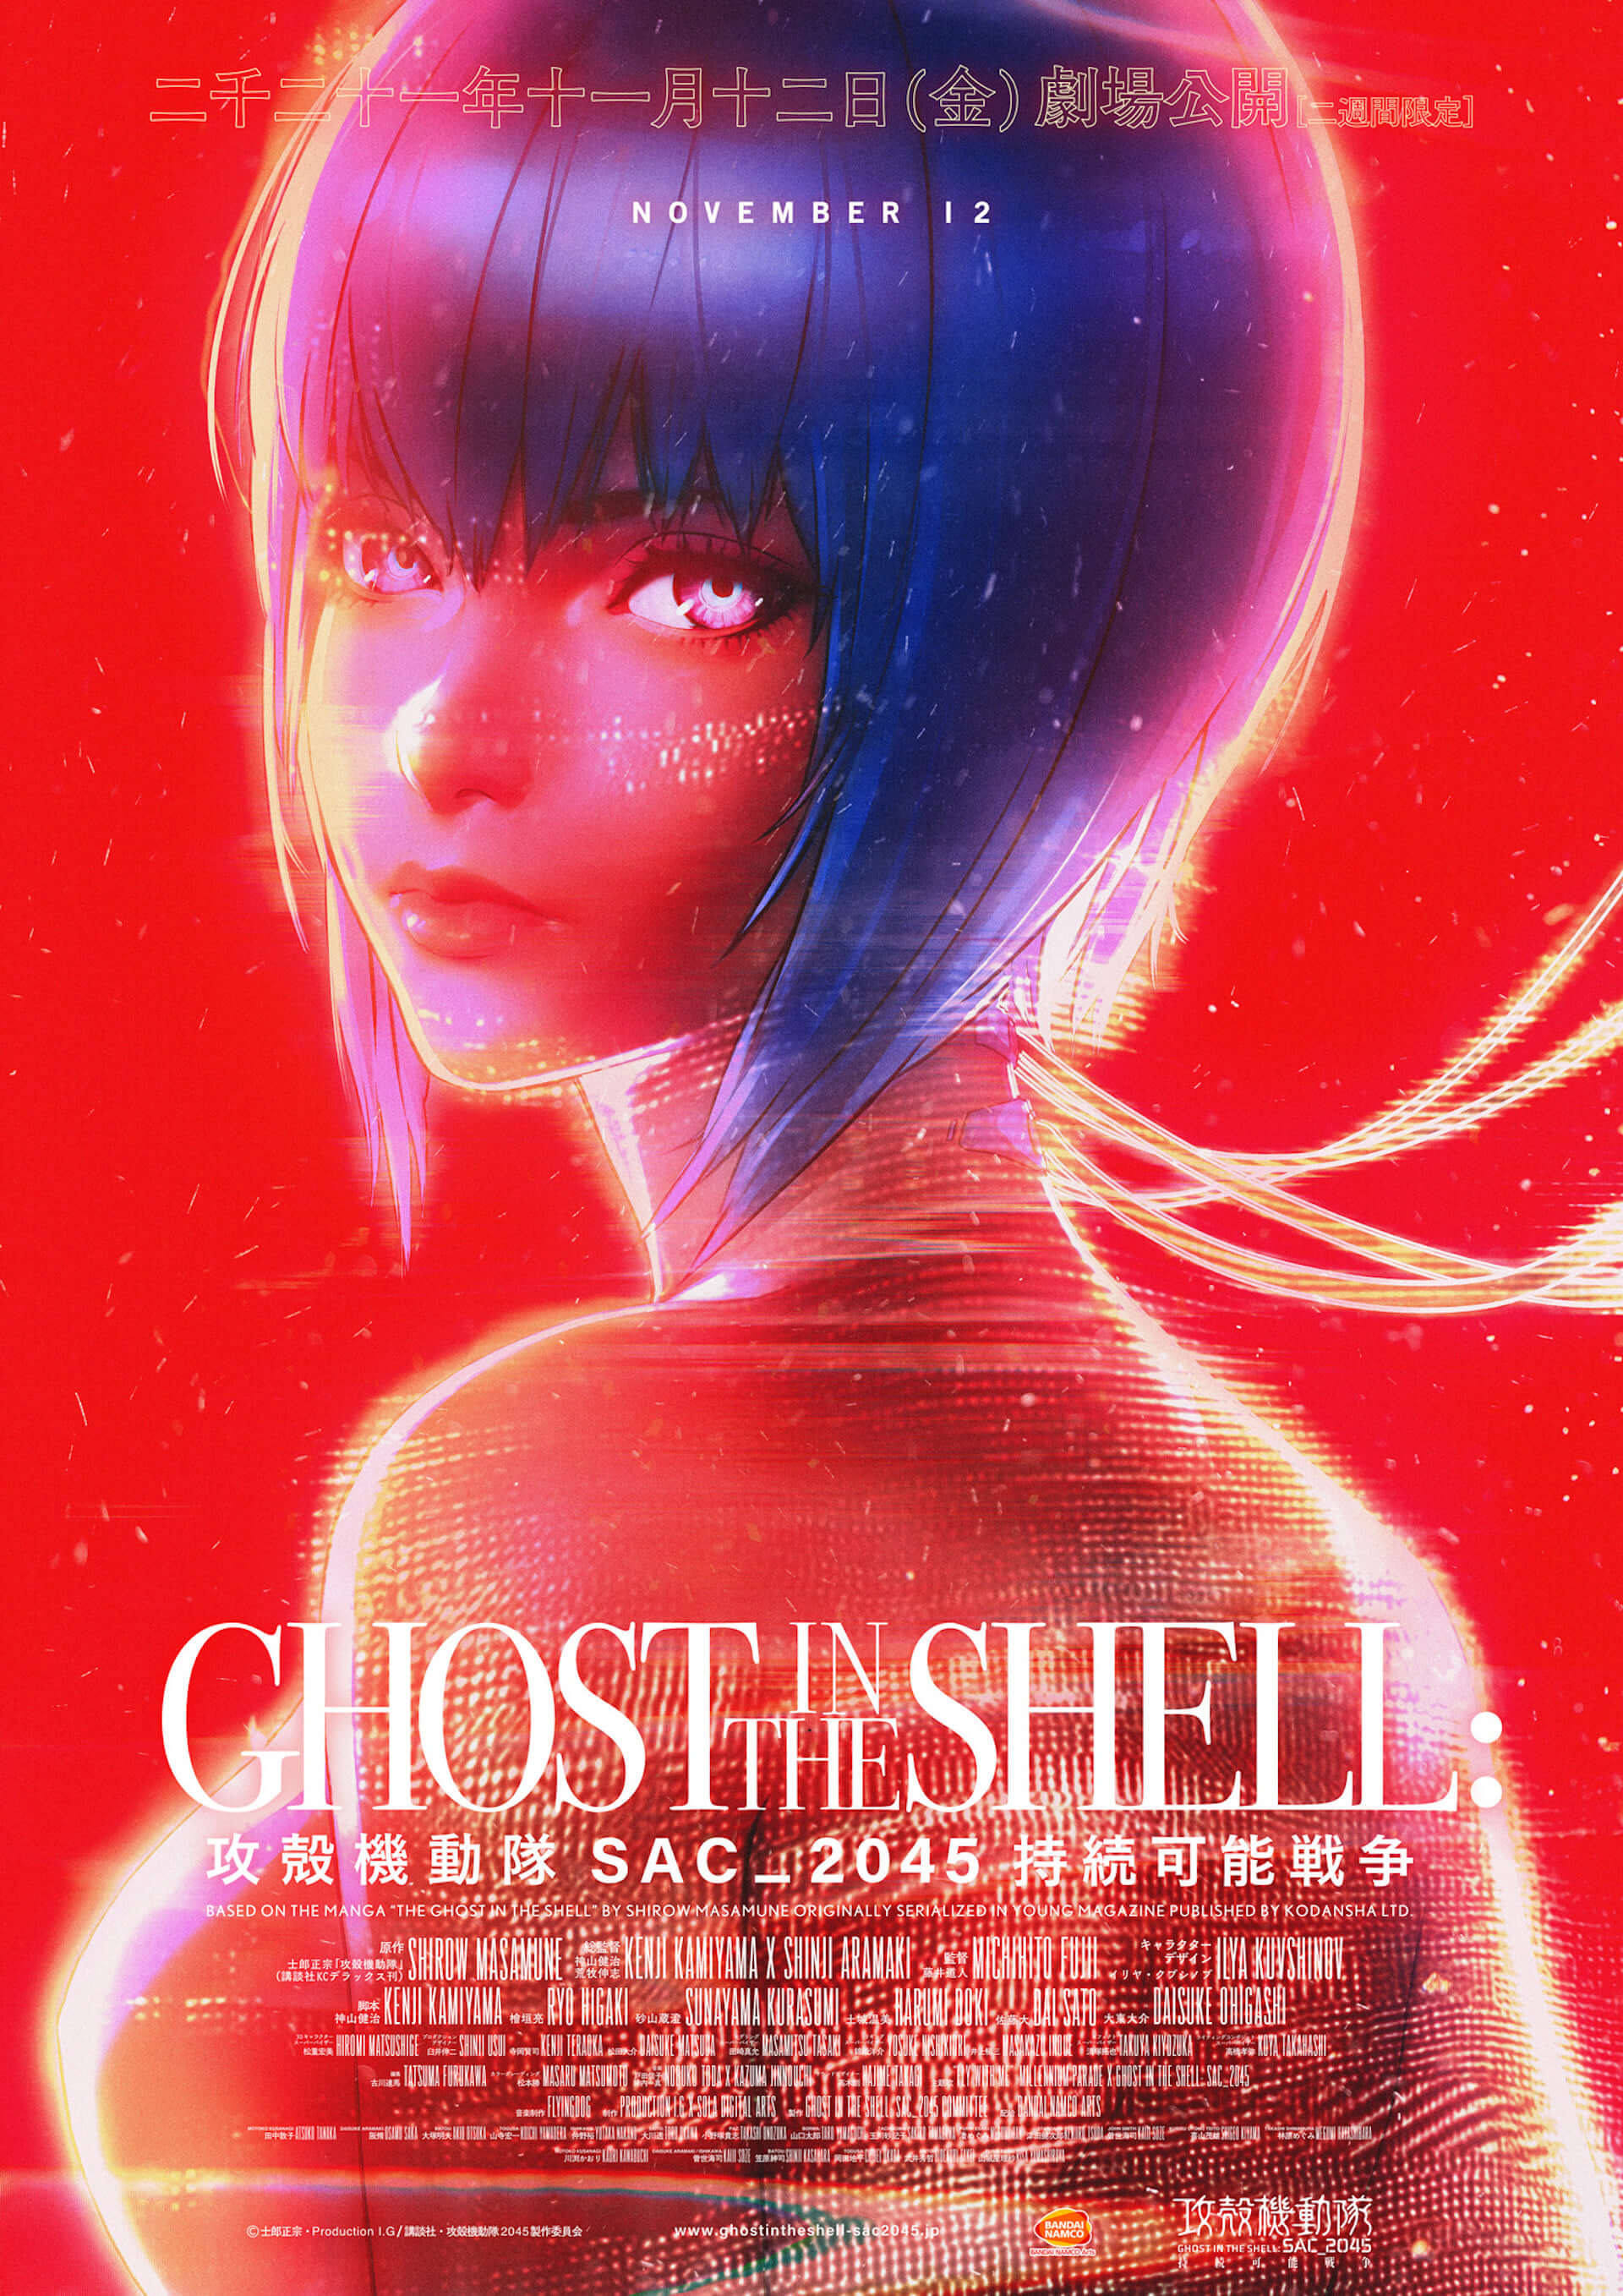 Mega Sized Movie Poster Image for Ghost in the Shell: SAC_2045 - Sustainable Warfare (#1 of 2)